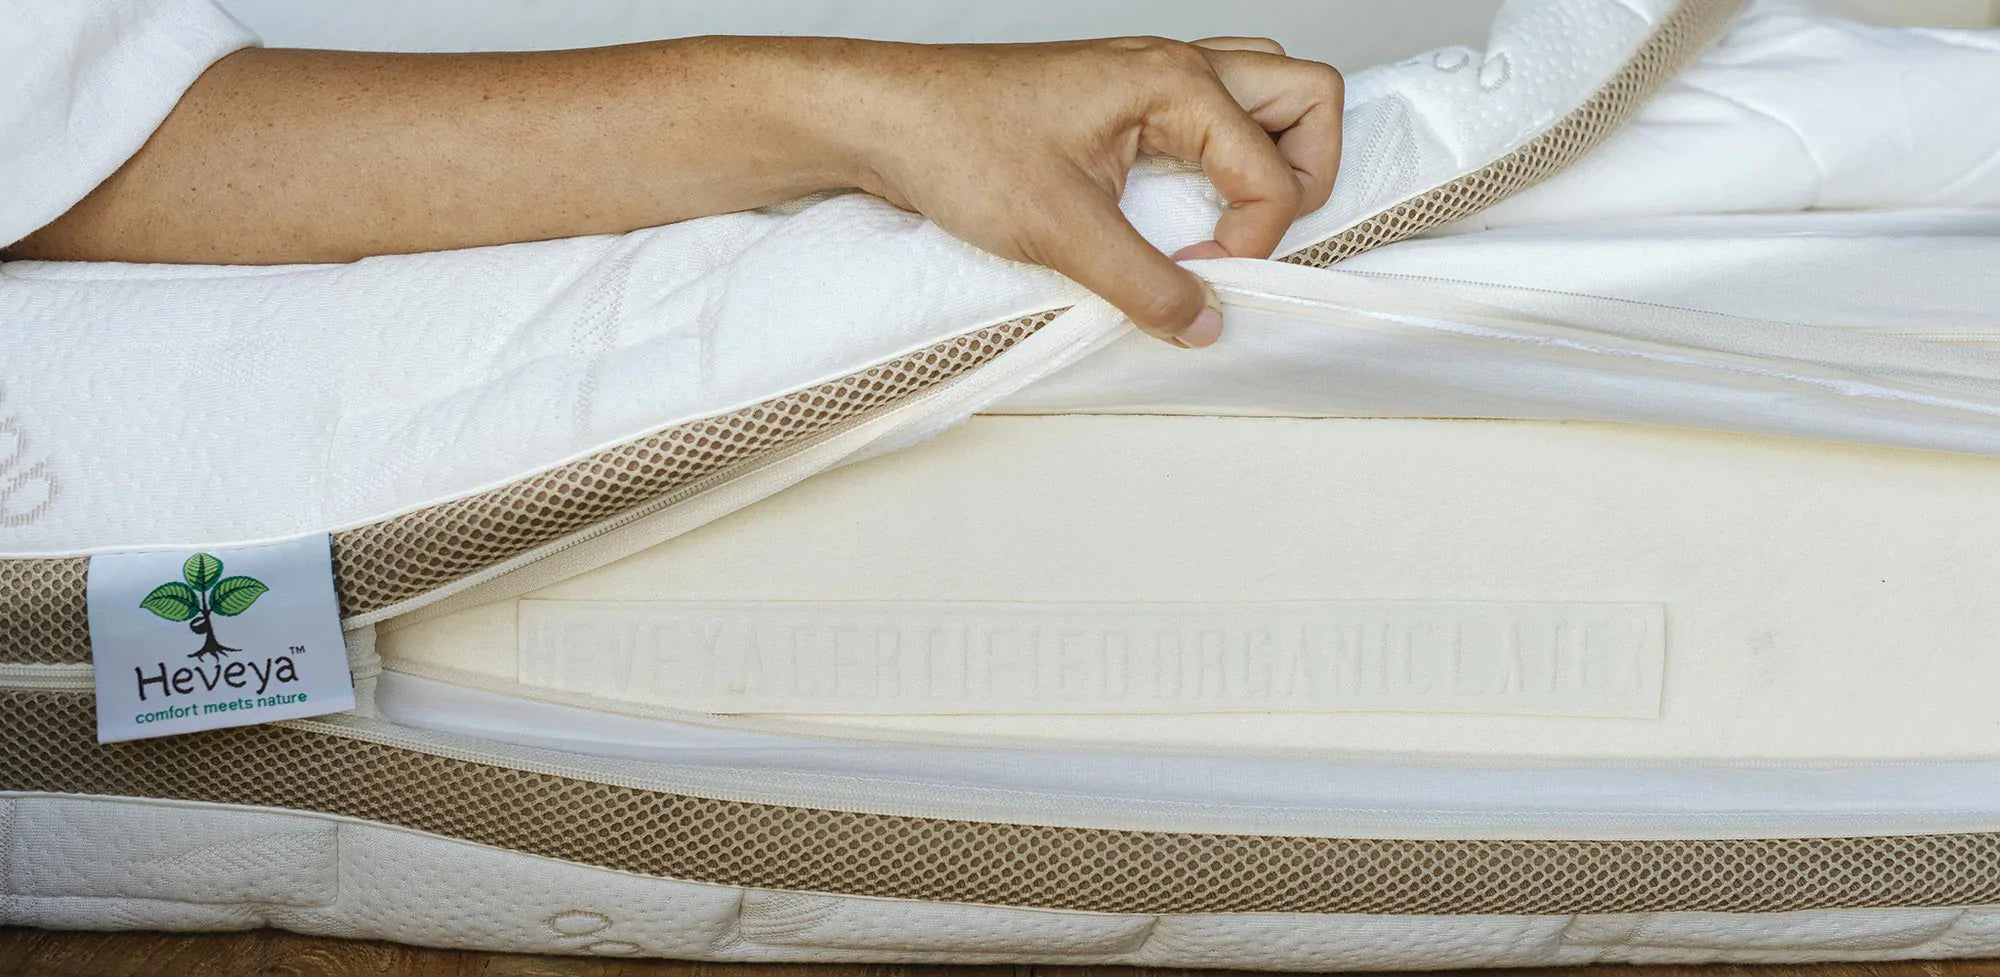 What Is The Most Elastic And Durable Mattress?